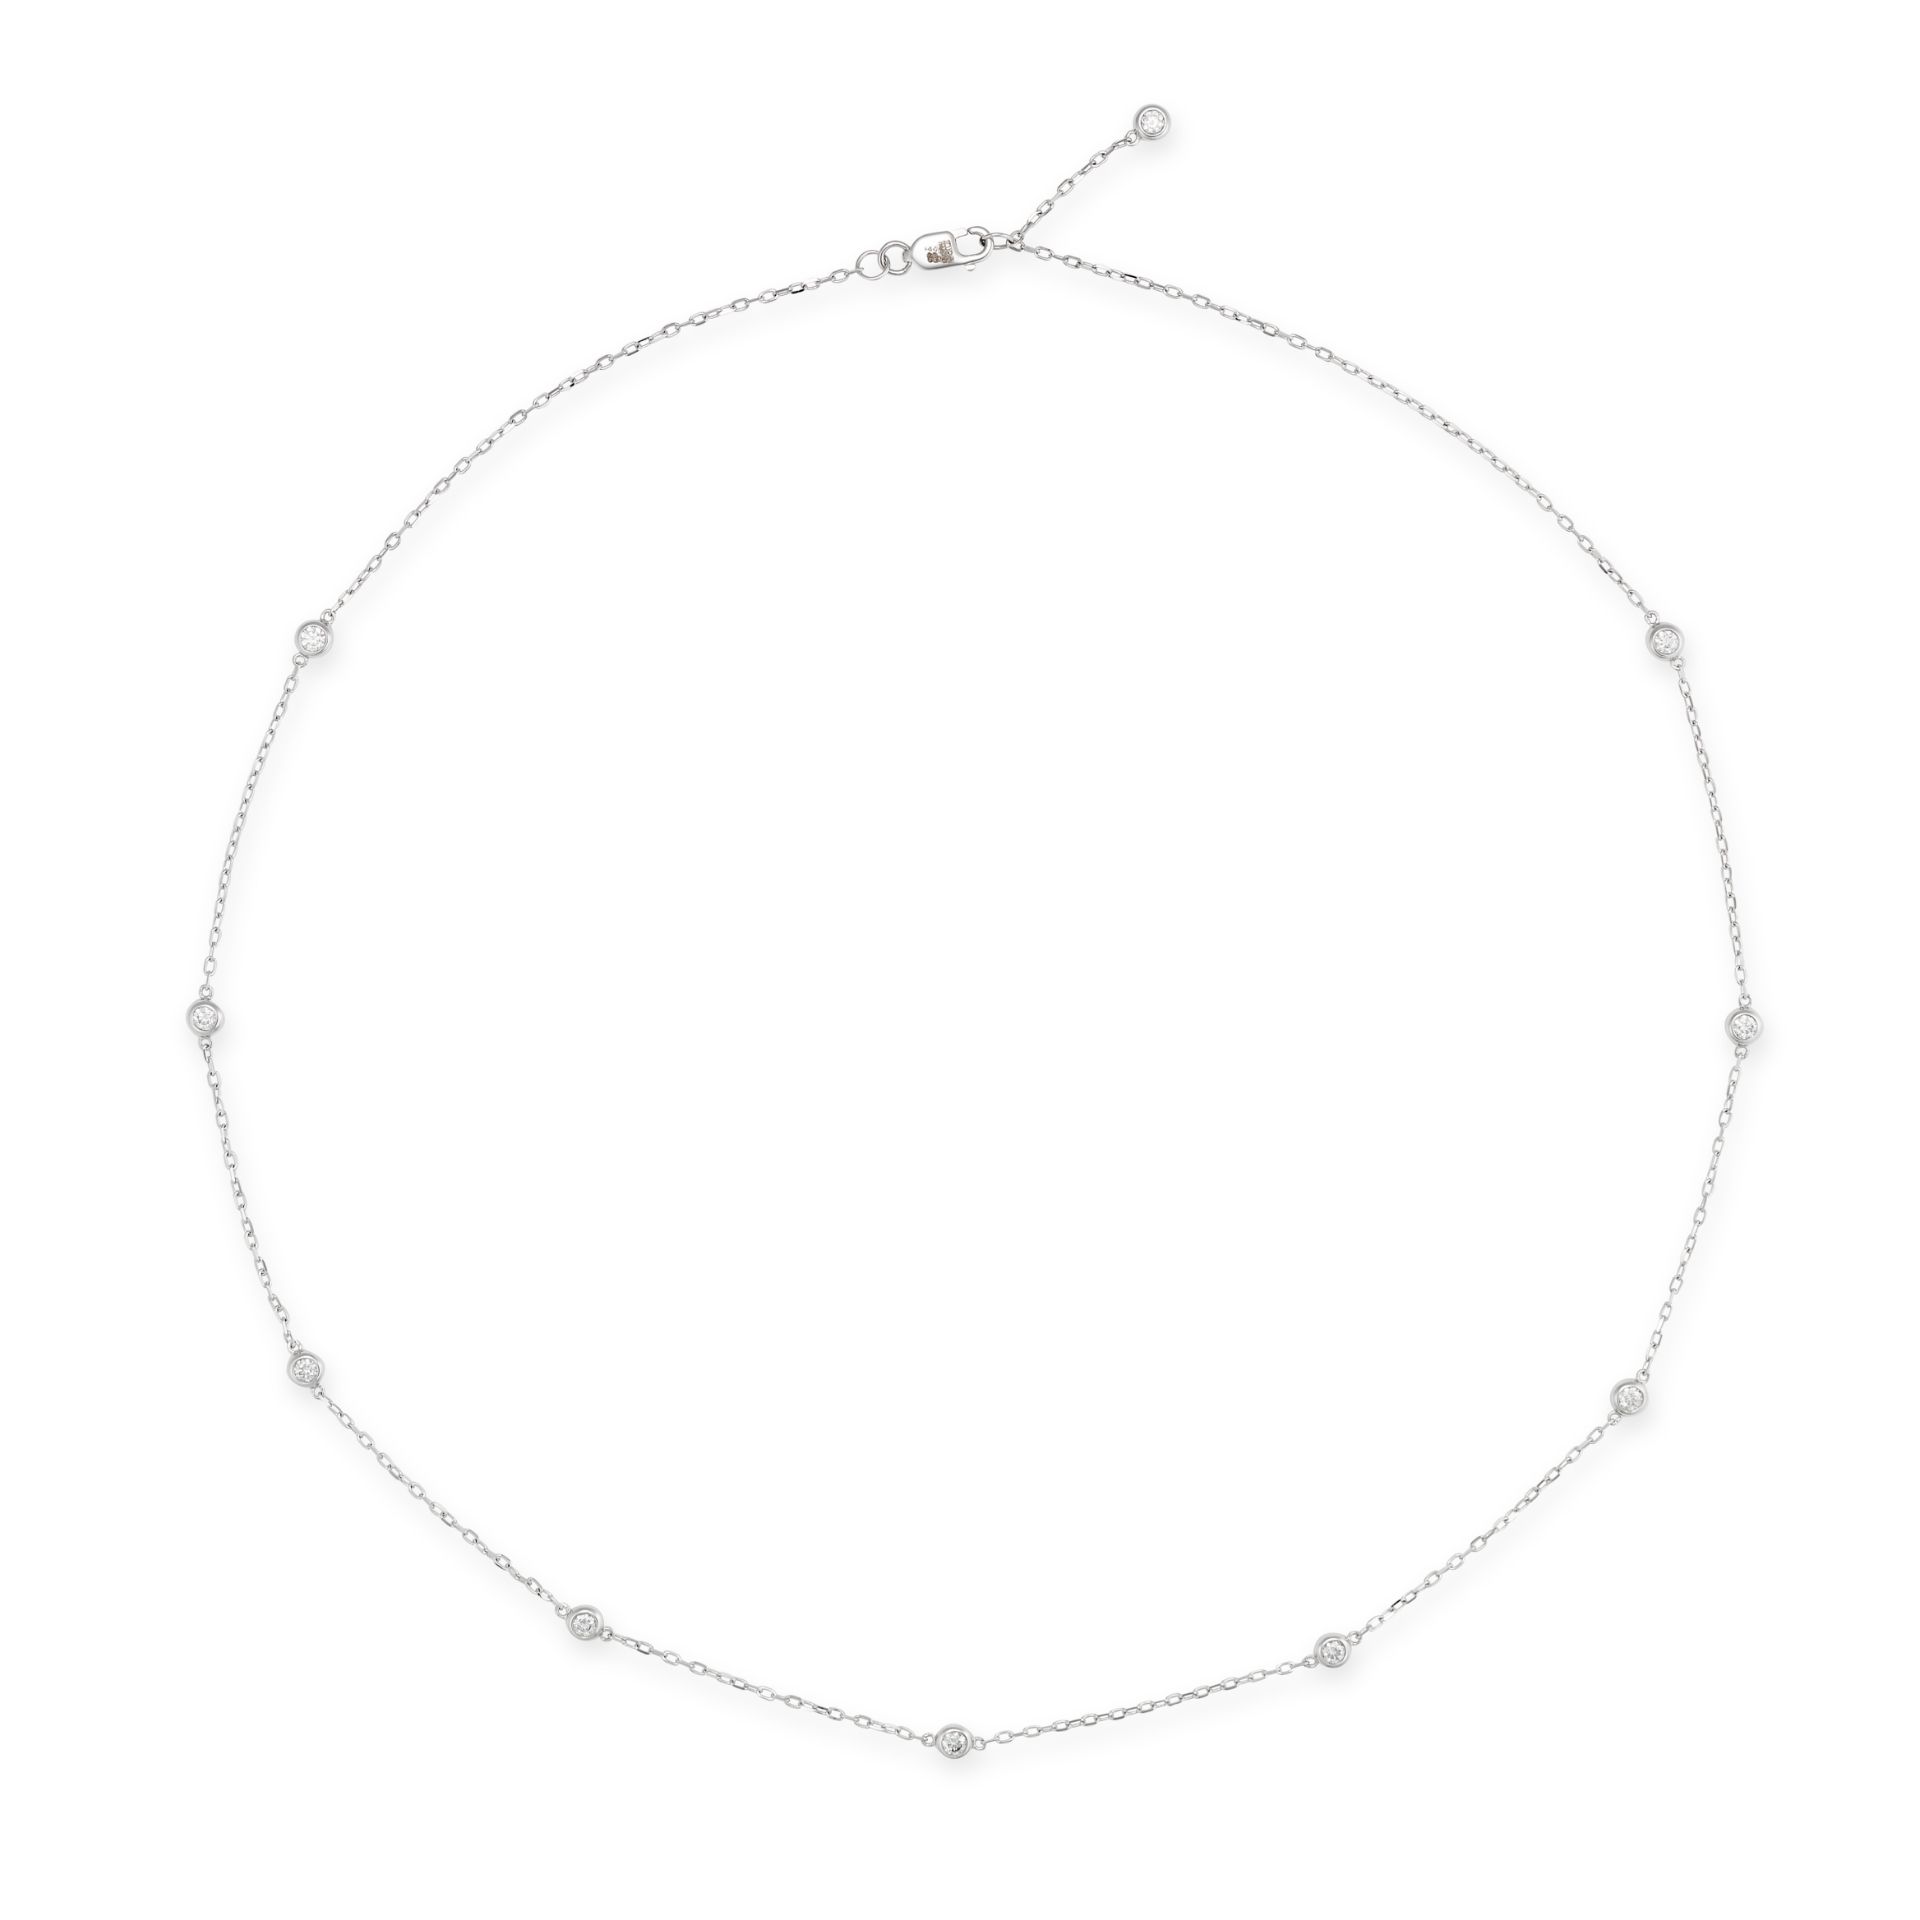 A DIAMOND TRACE CHAIN NECKLACE in 18ct white gold, set with round brilliant cut diamonds on a tra...